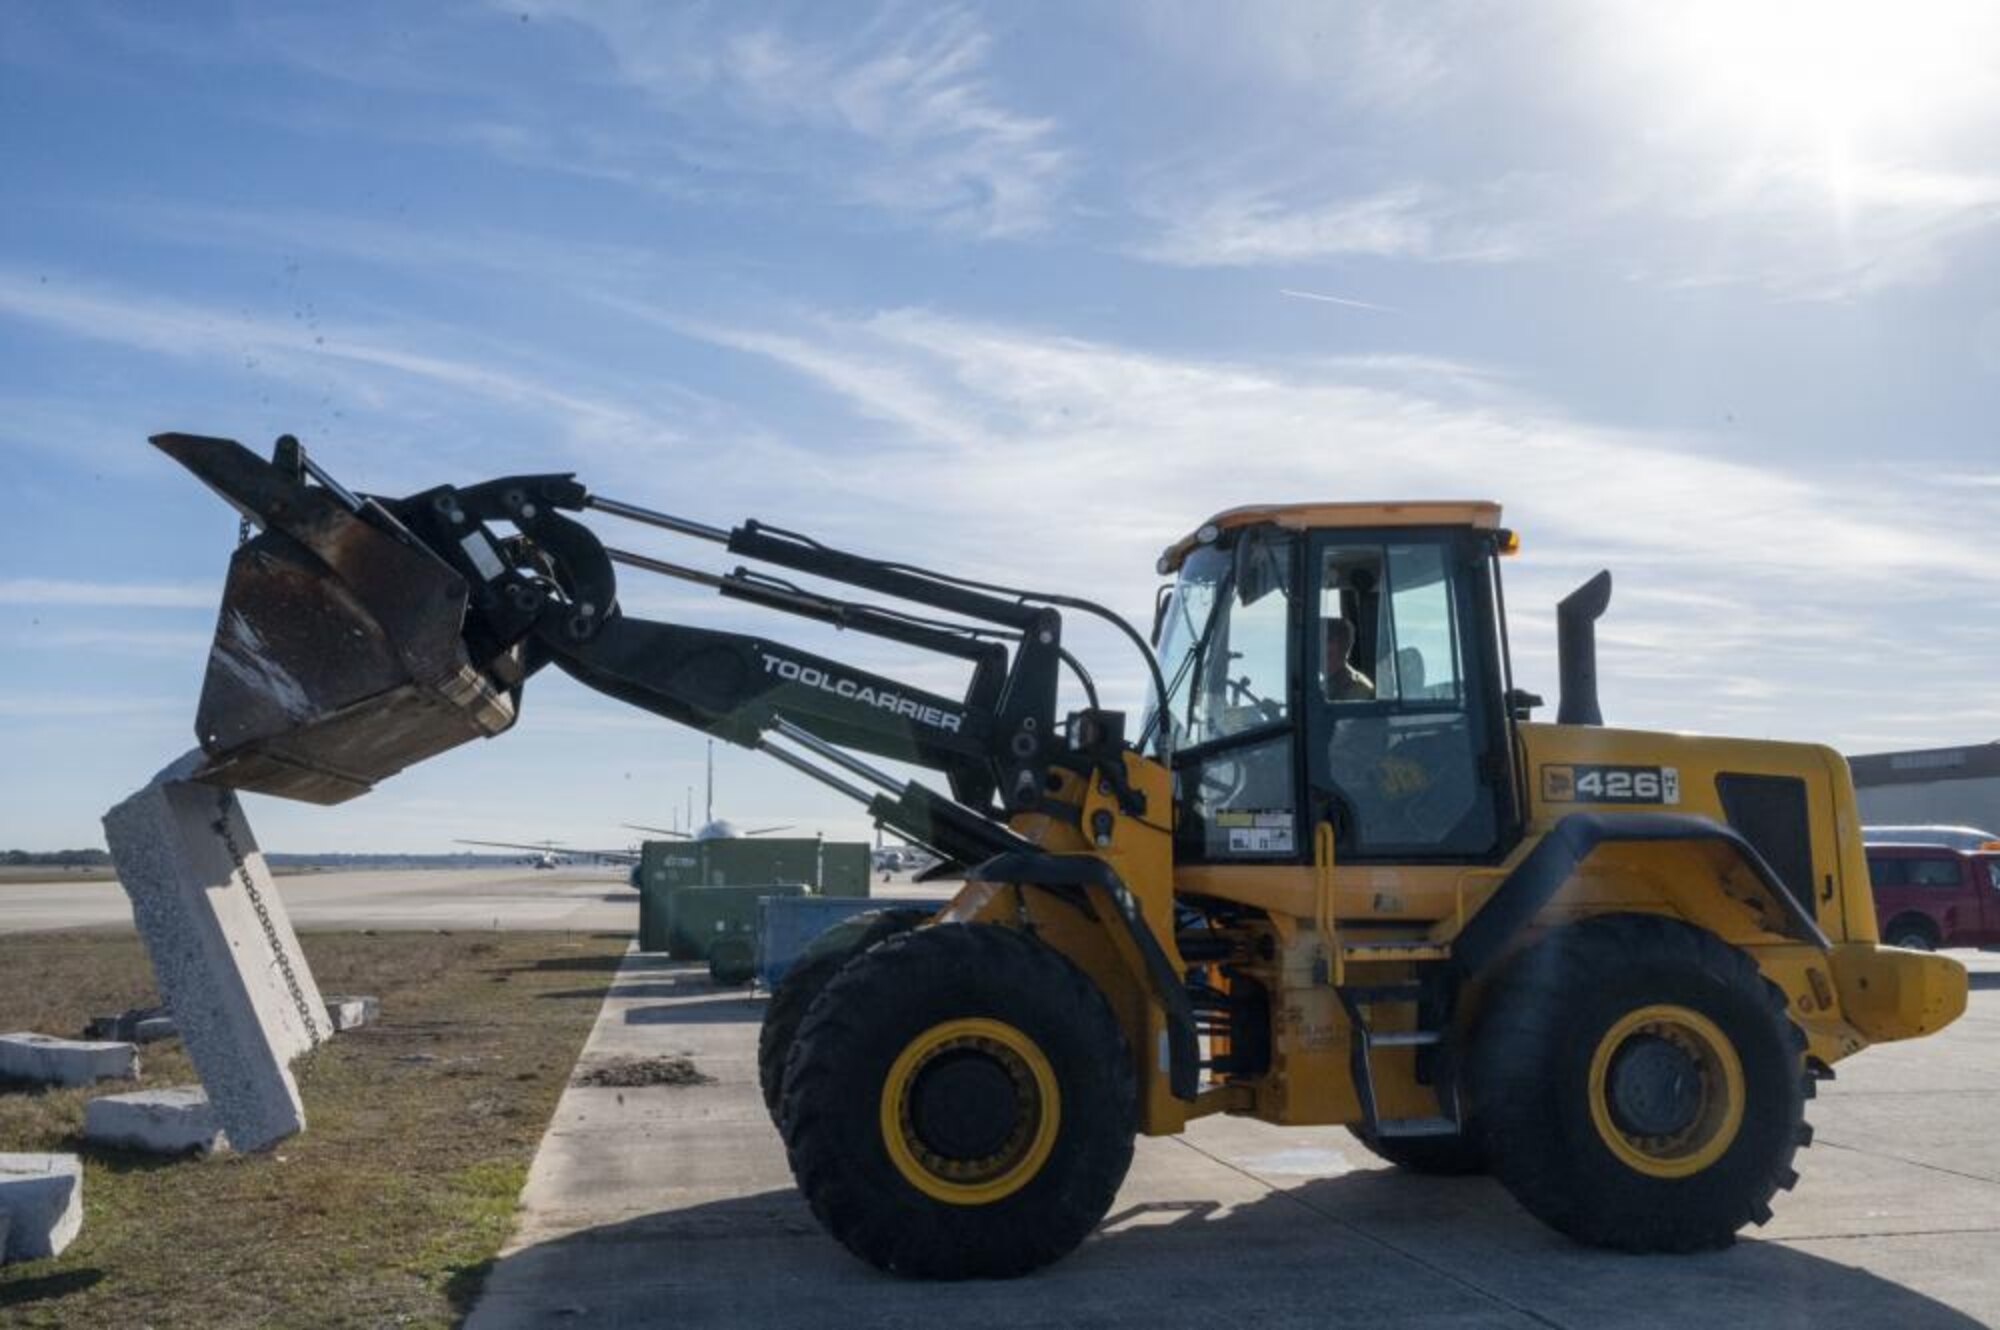 A U.S. Air Force Airman assigned to the 202nd RED HORSE Squadron, Florida Air National Guard, uses a skid-steer to remove a concrete slab from the airfield ramp at Naval Air Station Jacksonville, Florida, Feb. 7, 2023. The Airmen are rehabbing the airfield to ensure taxiway concrete can withstand the weight of the U.S. Navy's P-8A Poseidon aircraft. (U.S. Air National Guard photo by Master Sgt. Brian Cleary)